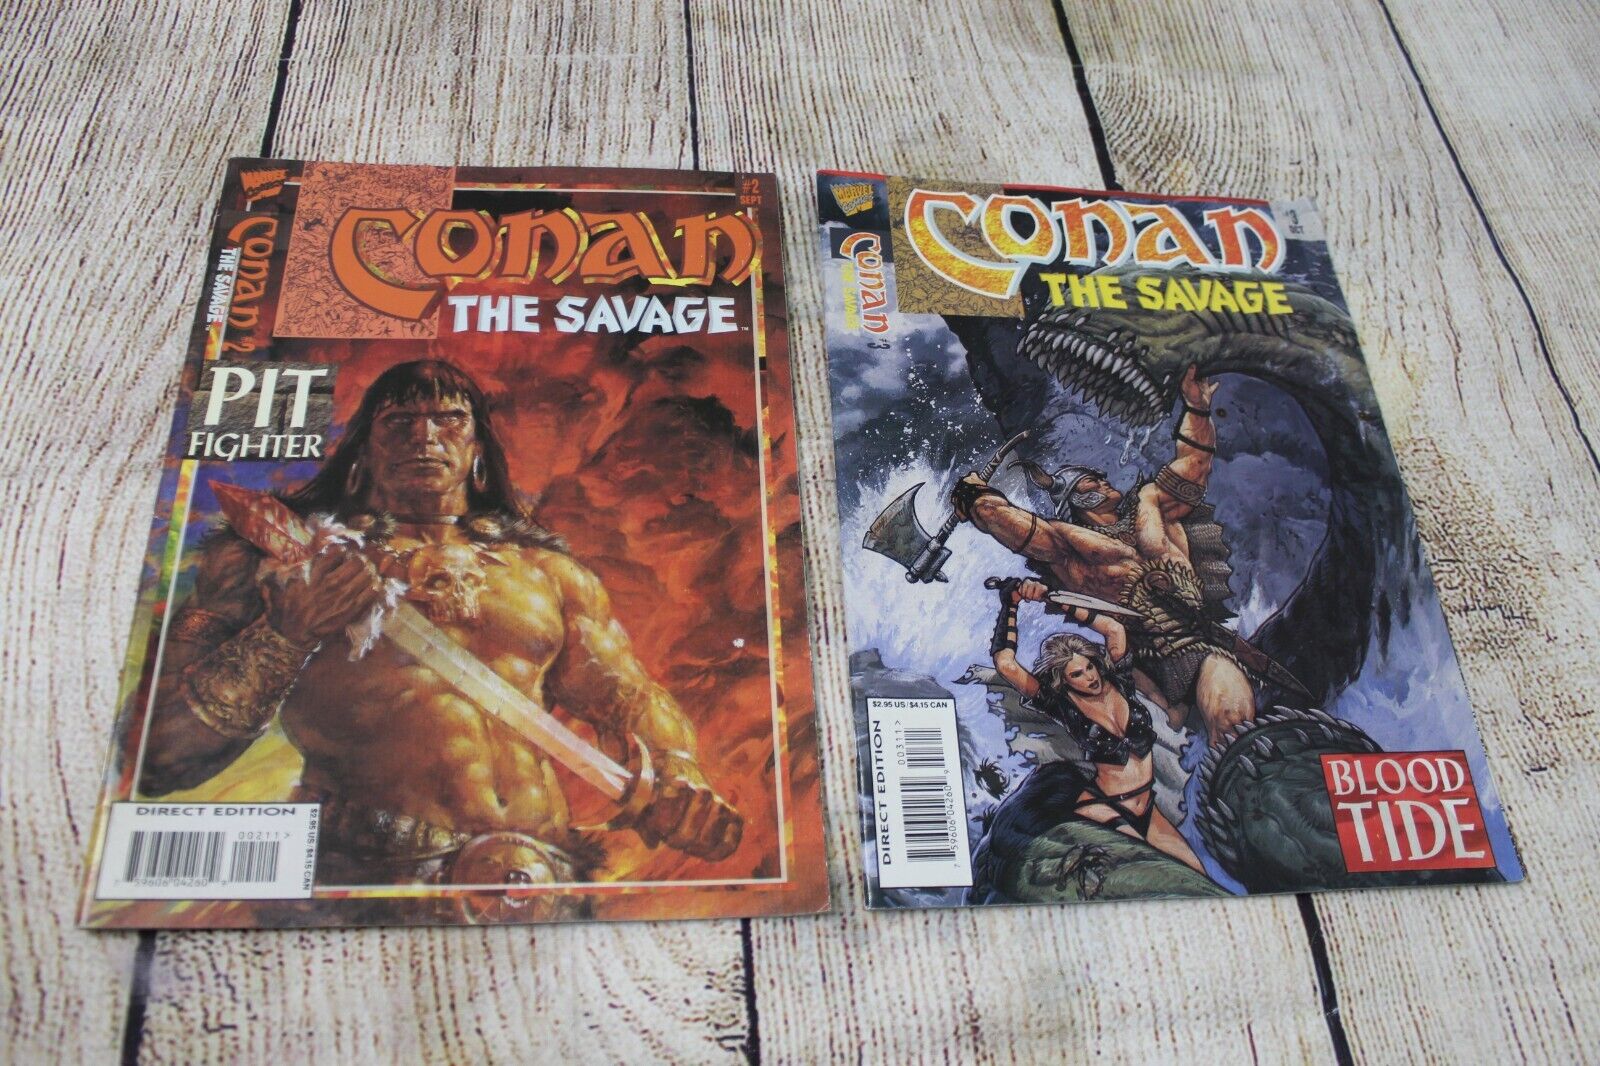 1995 Marvel Conan The Savage #2 & #3 Pit Fighter Blood Tide *Low to Mid Grade*